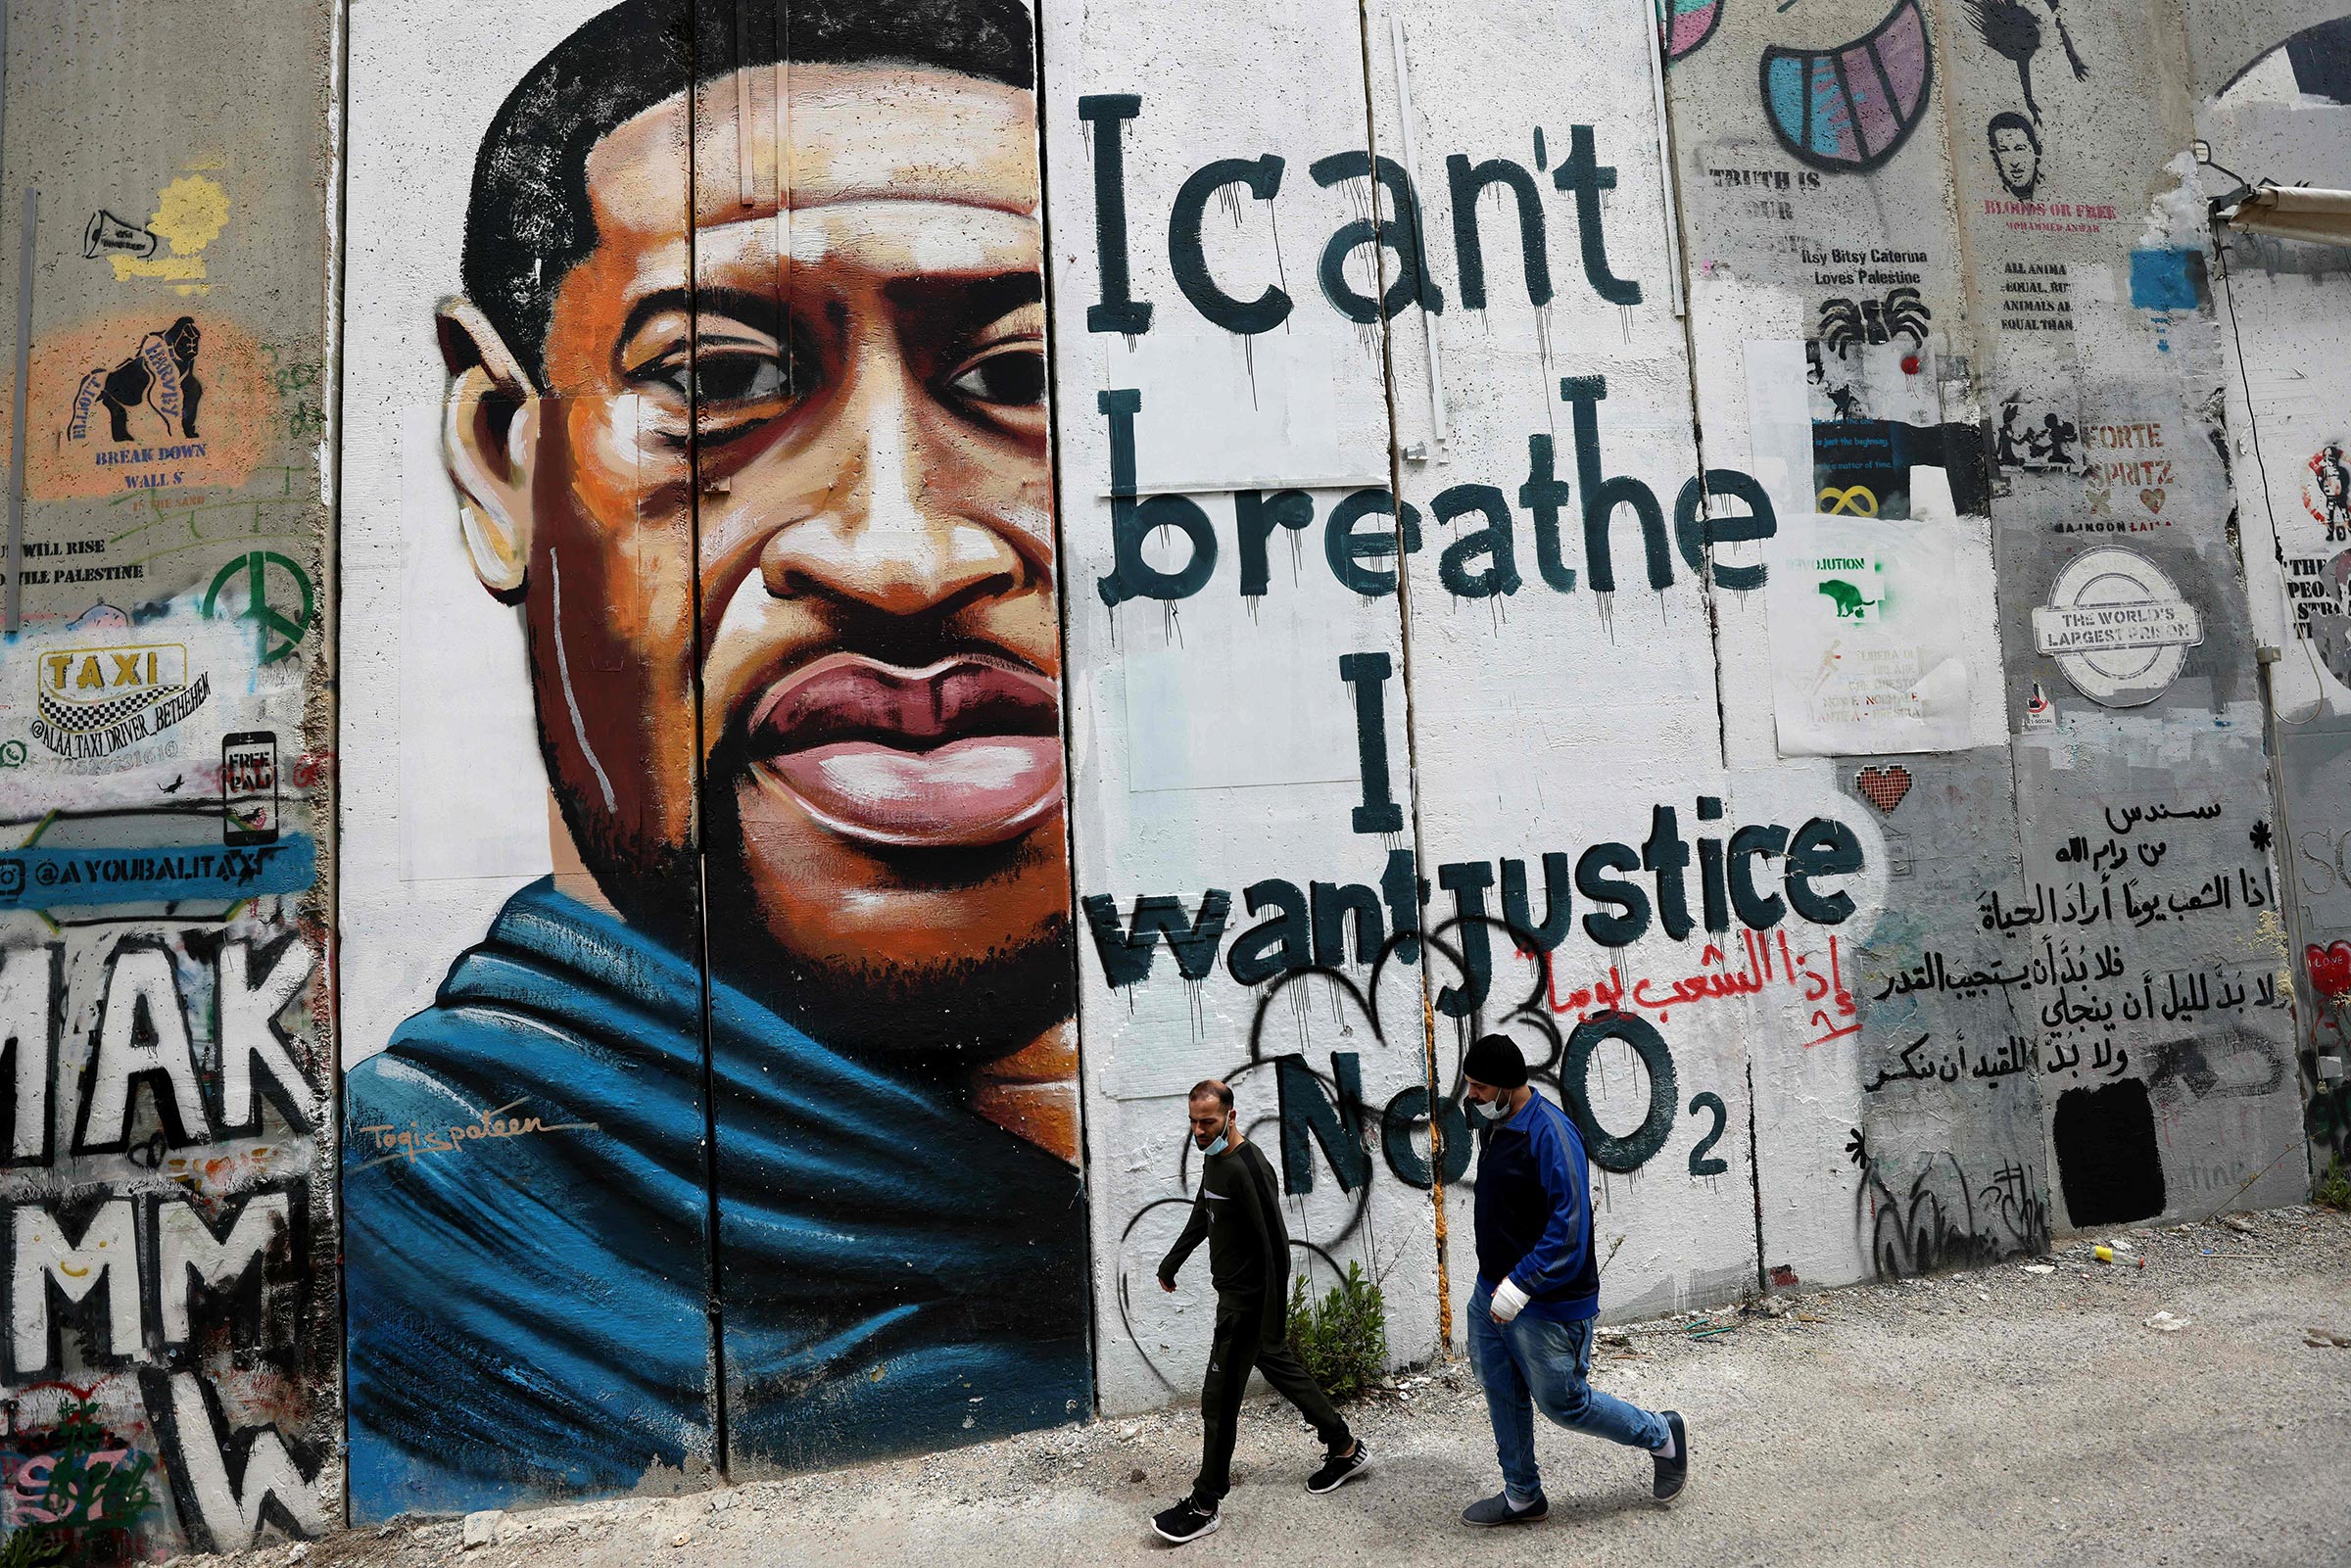 People walk past a mural showing the face of Floyd painted on a section of Israel's controversial separation barrier in Bethlehem on March 31, 2021. (Emmanuel Dunand—AFP/Getty Images)